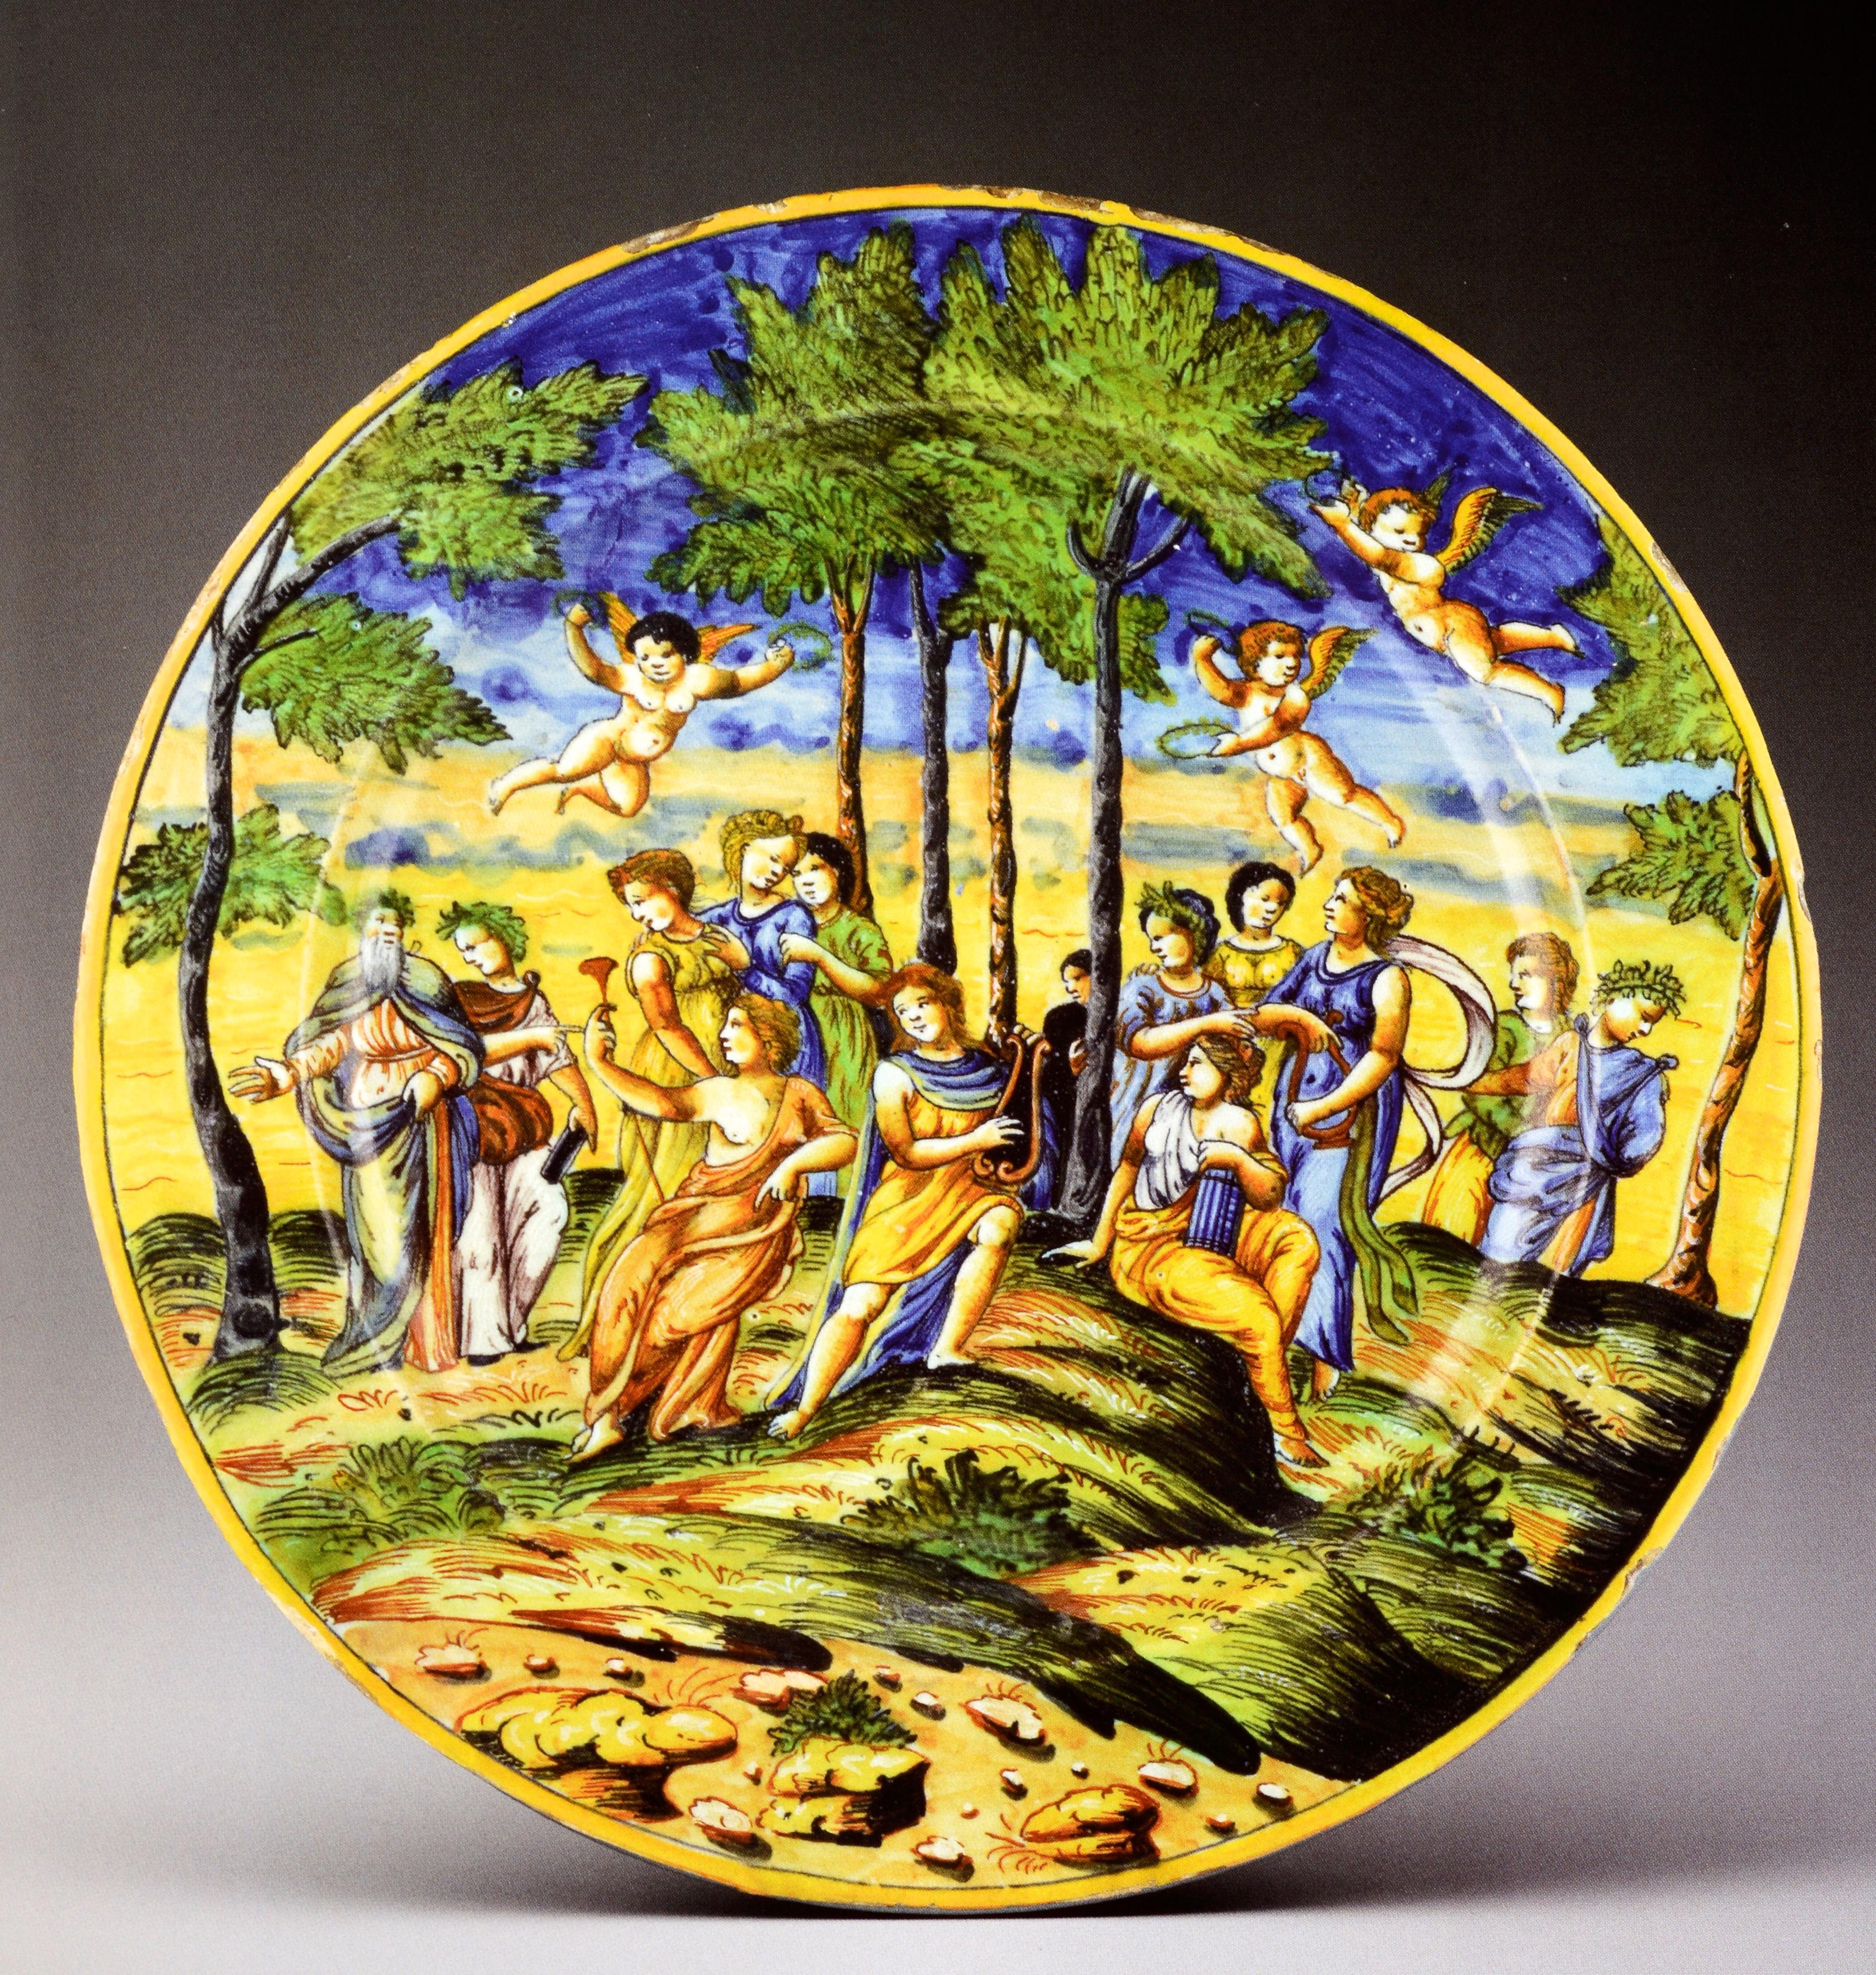 Urbino - Venice Italian Renaissance Ceramics, Feu et Talent This catalogue has been published on the occasion of Frieze Masters 2016 Regents Park, London From 6-9th of October 2016. The Maiolica of Renaissance Venice at the beginning of the 16th c